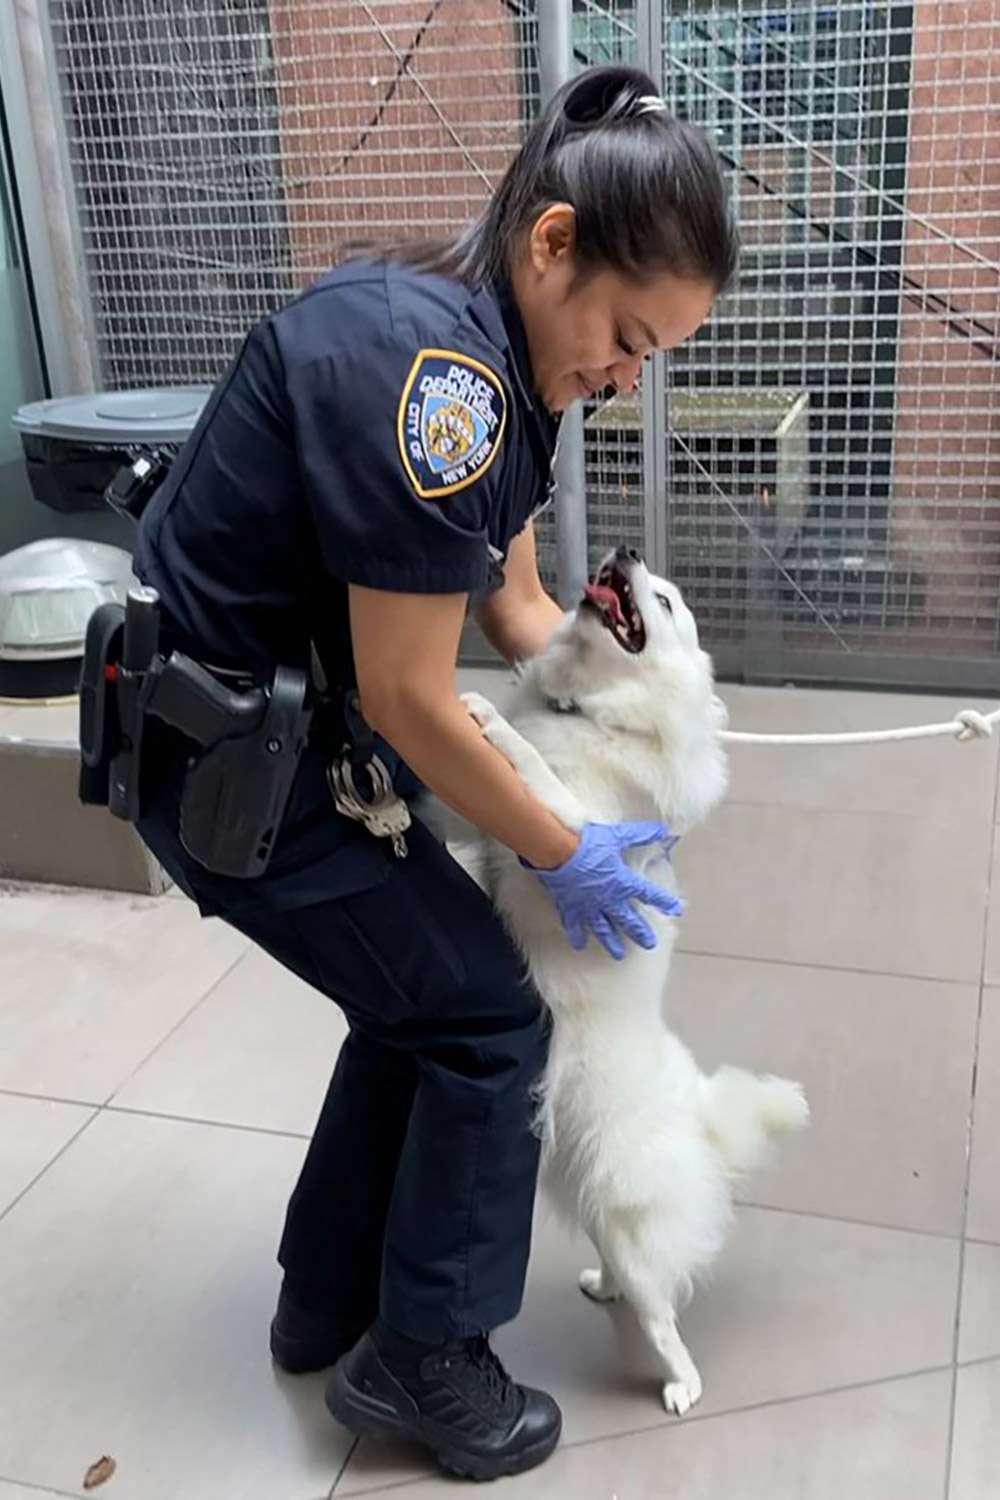 NYPD Officer Adopts Dog She Rescued from Locked Hot Car: They 'Will Never Be Neglected Again'